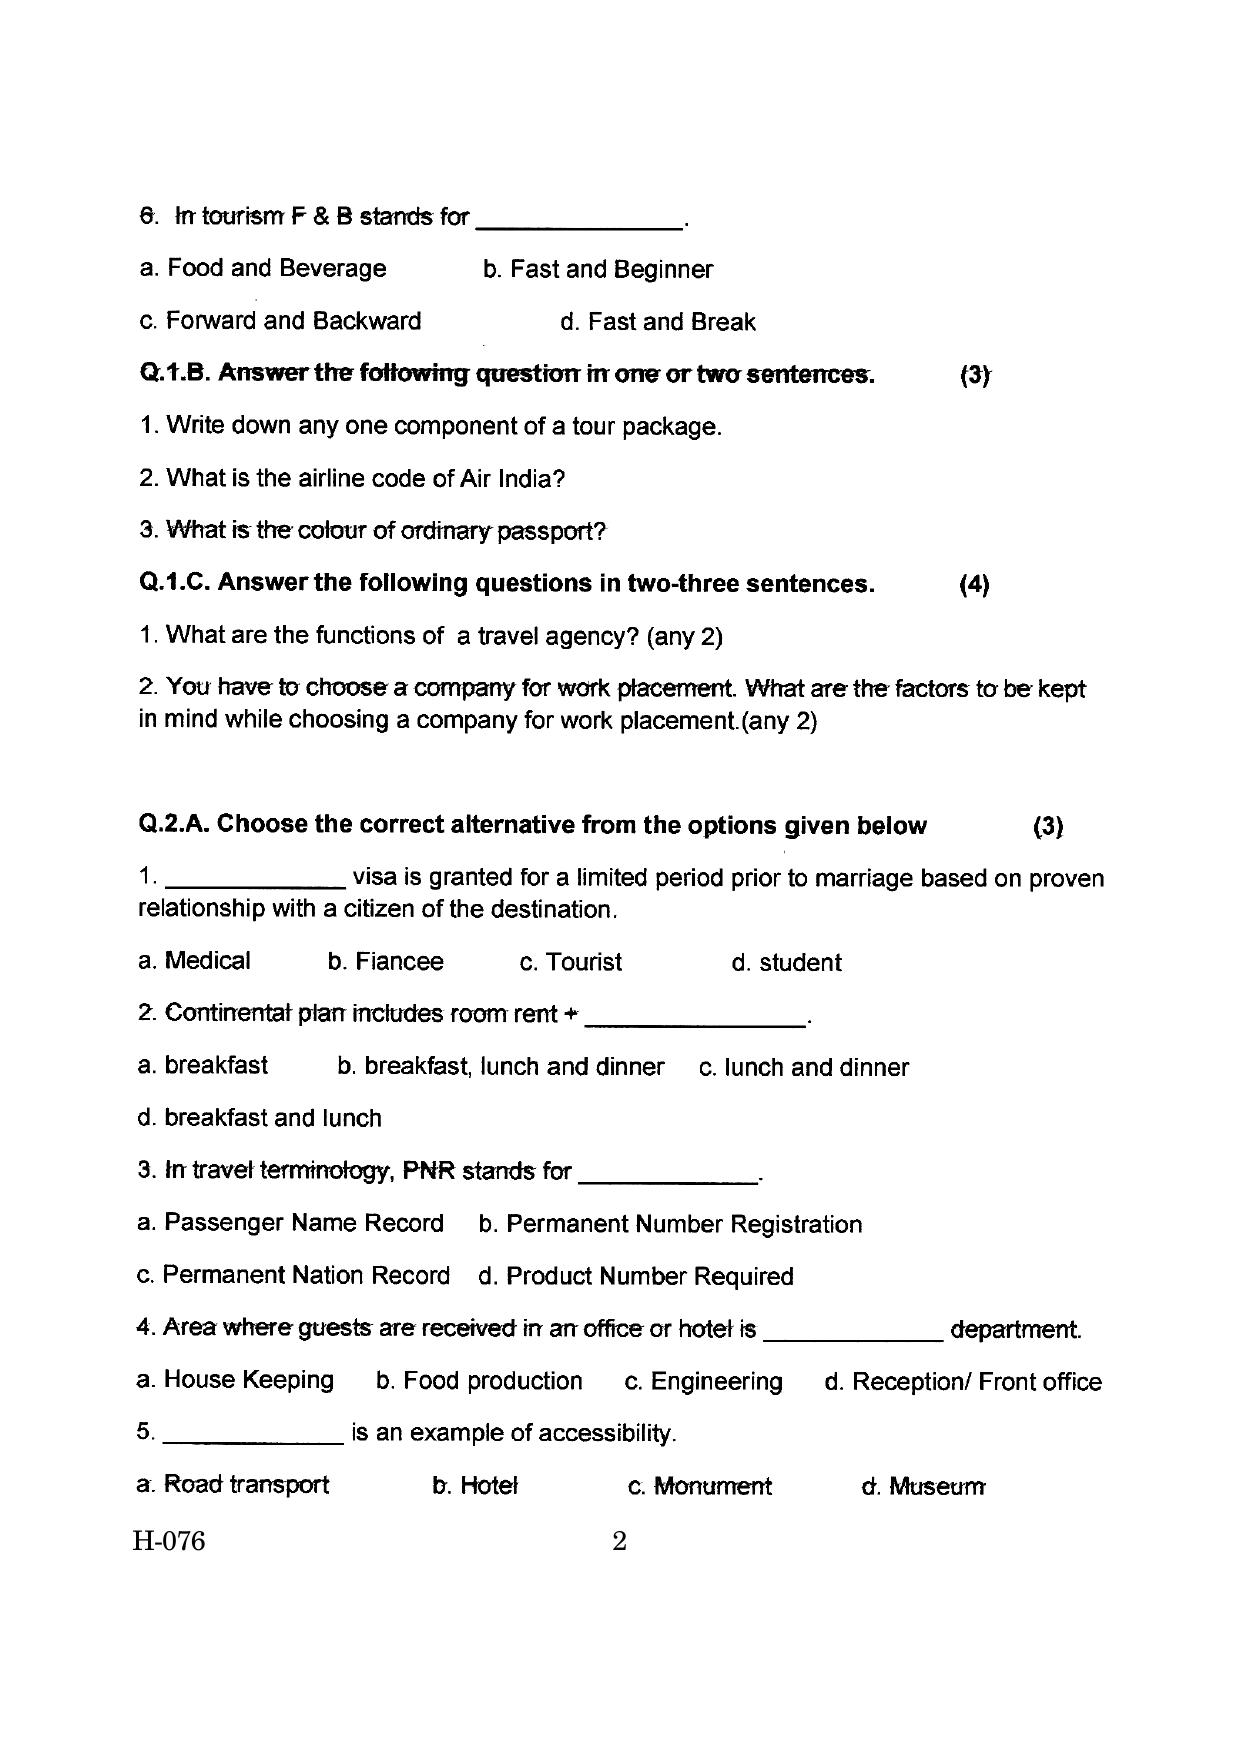 Goa Board Class 12 Travel & Tourism   (March 2019) Question Paper - Page 2